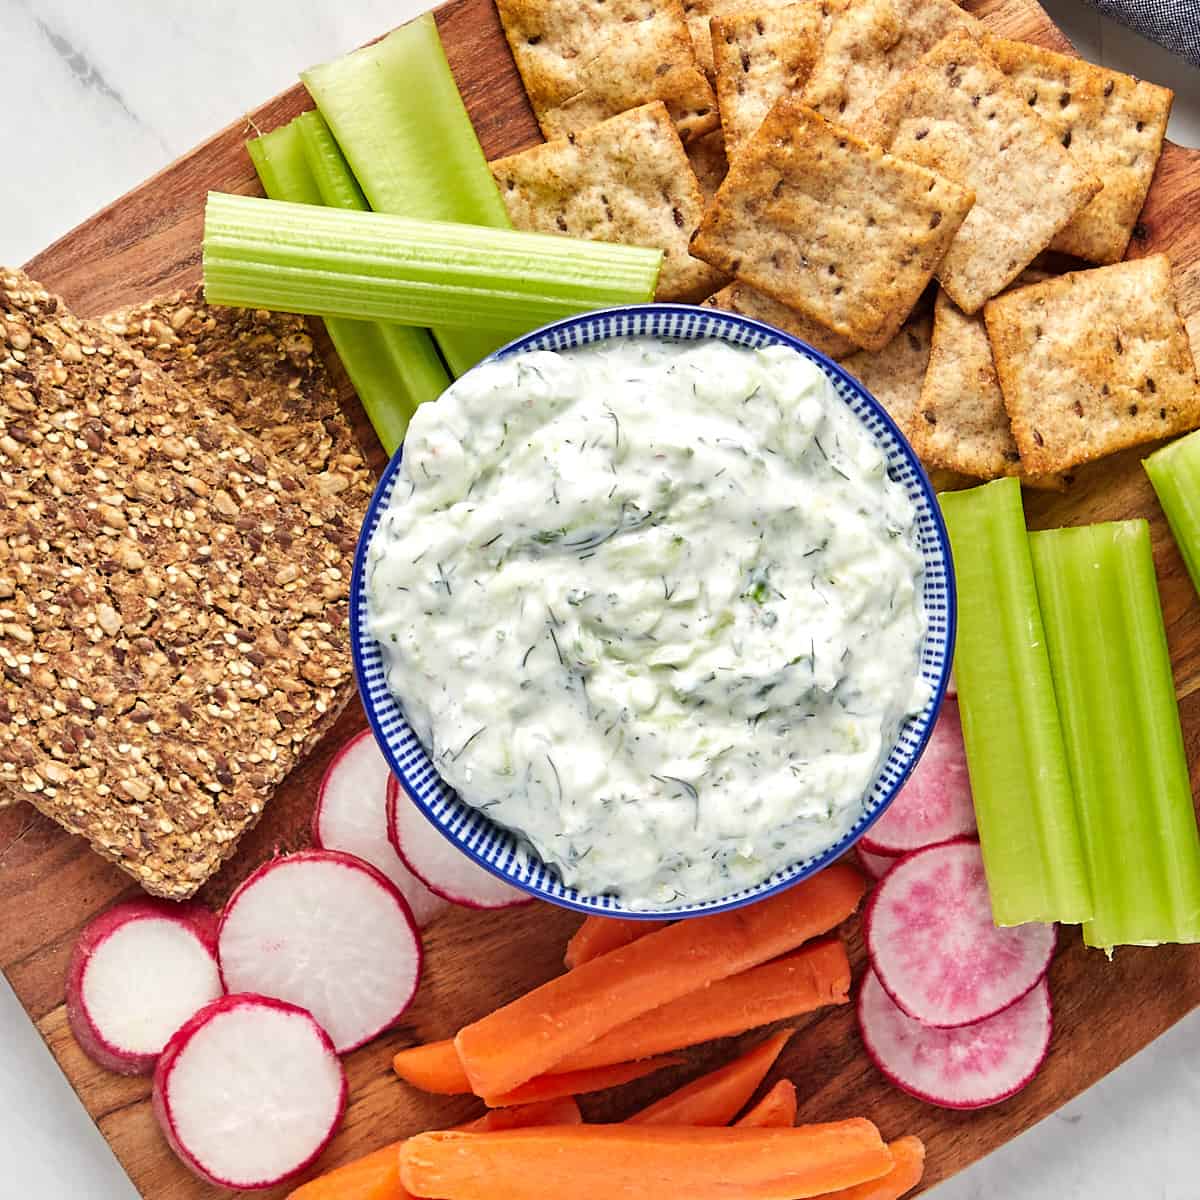 tzatziki sauce in bowl served on a wood board with sliced radishes, carrot sticks, celery sticks, pita crackers, and nut crackers